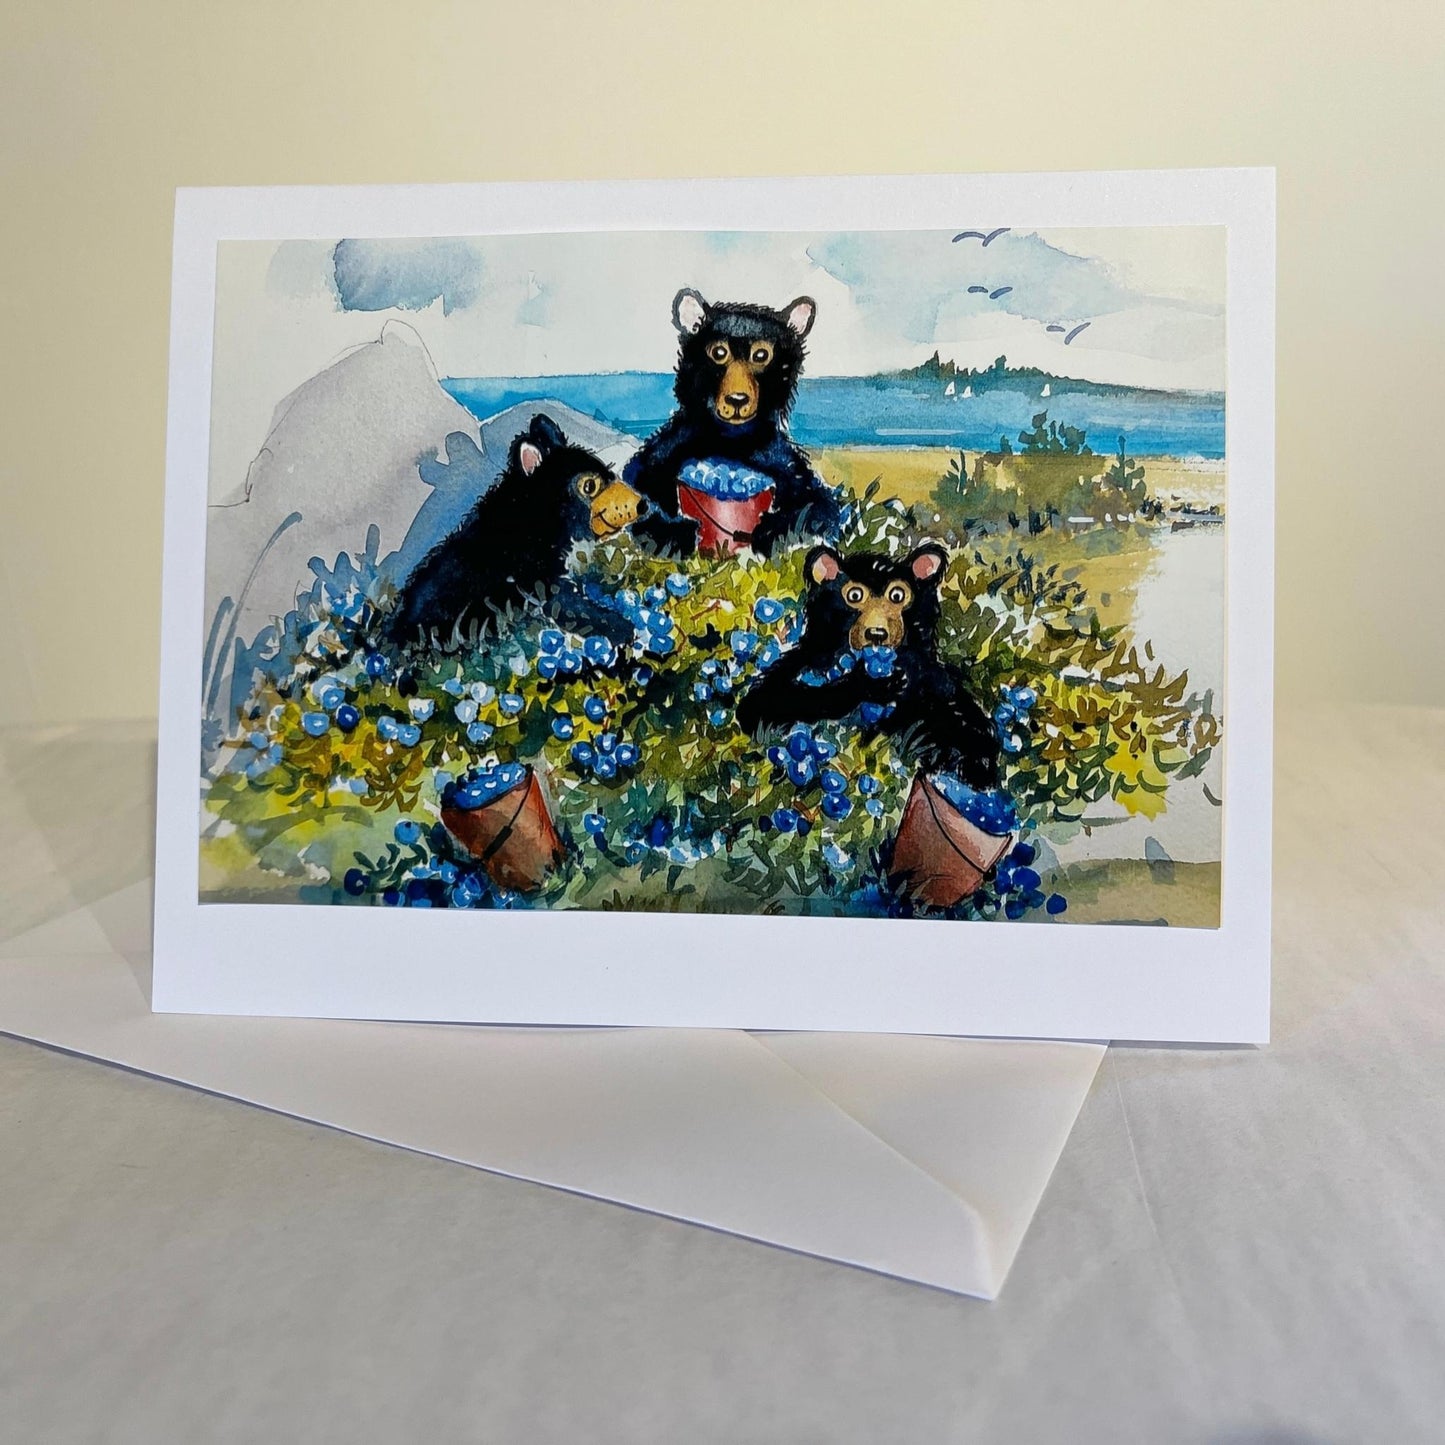 bears eating blueberries illustration note card with envelope